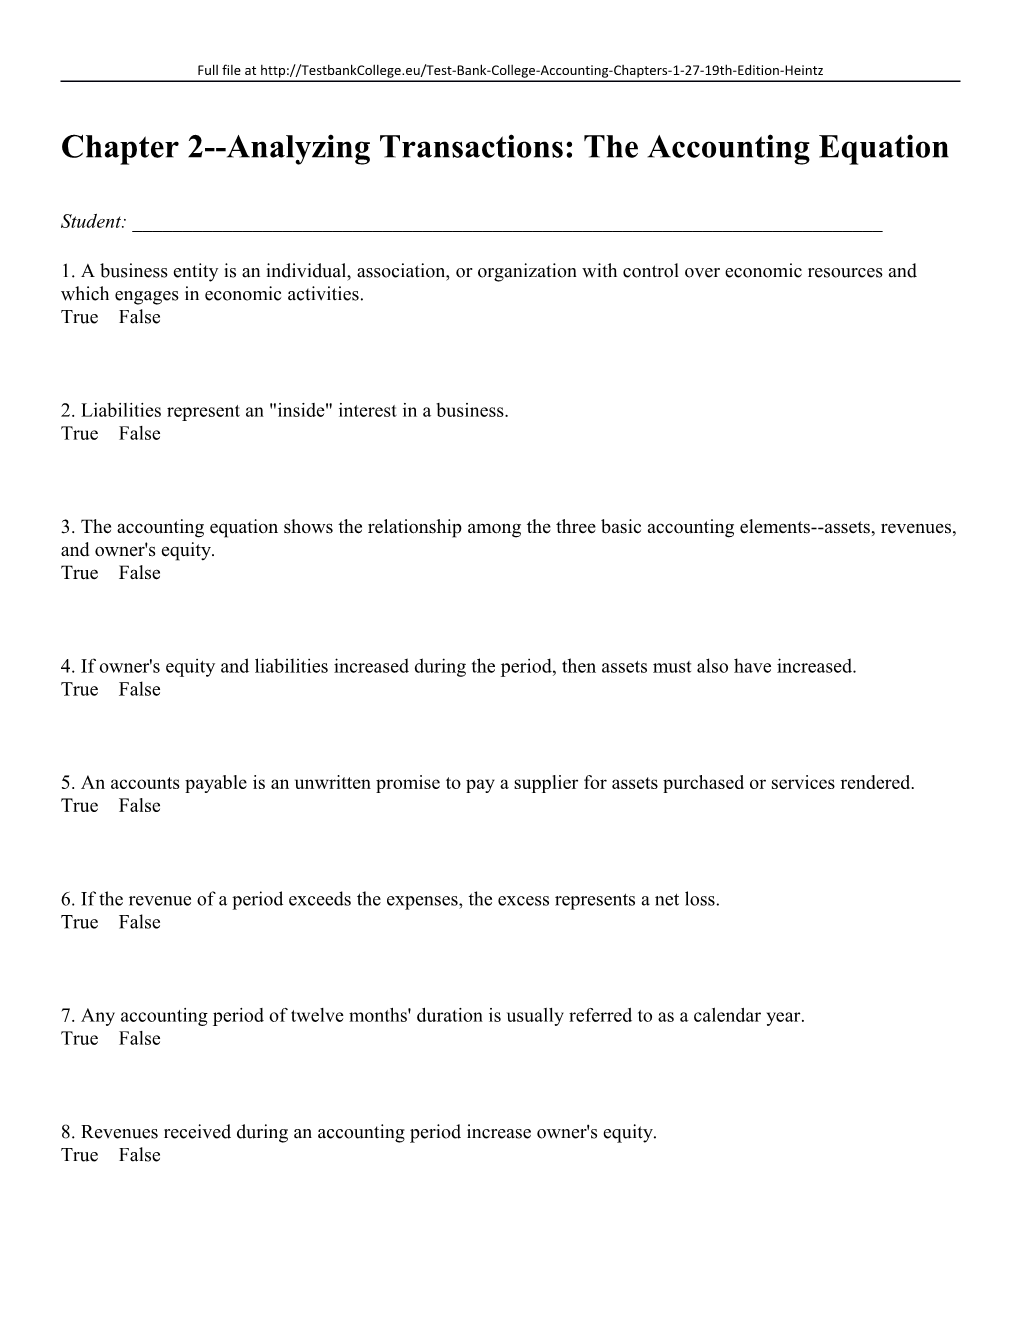 Chapter 2 Analyzing Transactions: the Accounting Equation